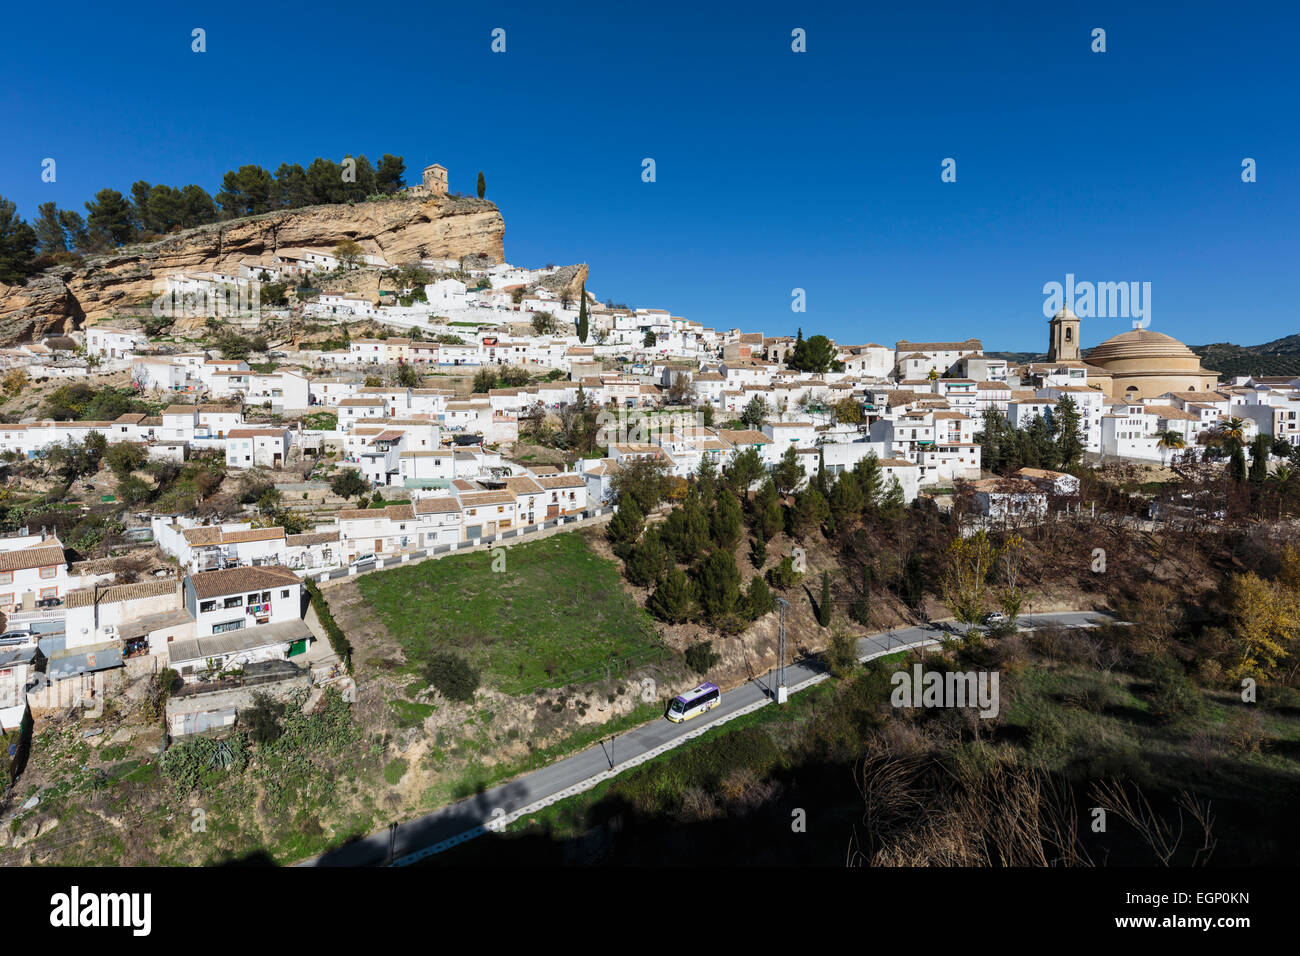 Montefrio, Granada Province, Andalusia, southern Spain. Typical white mountain town. Stock Photo